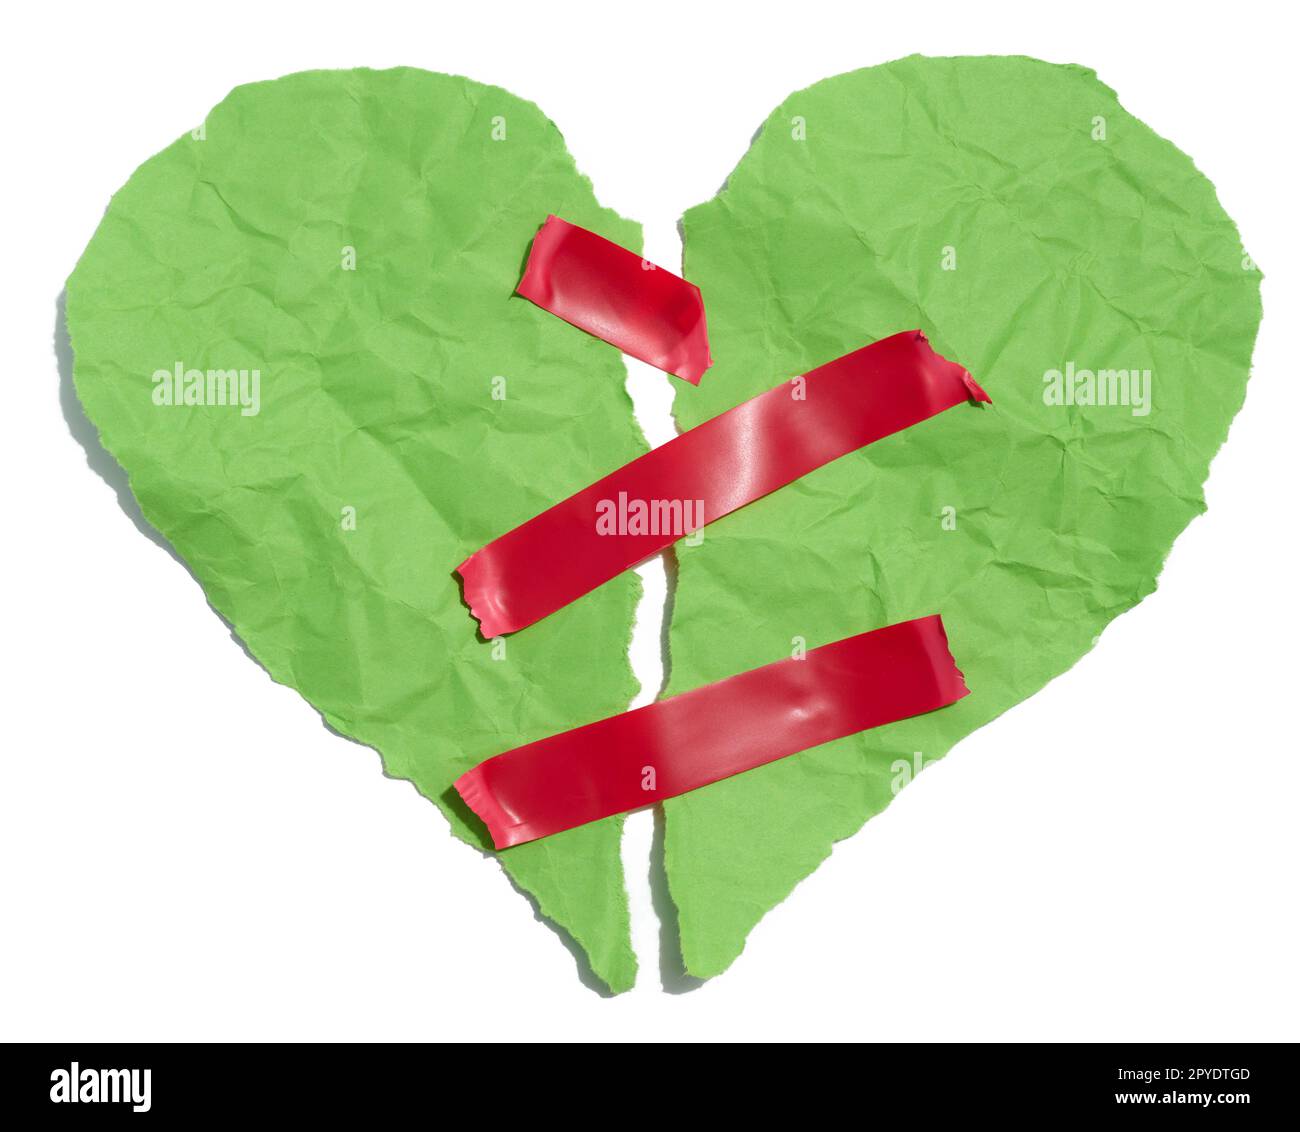 Torn heart made of green crumpled paper fastened with red electrical tape on a white background Stock Photo